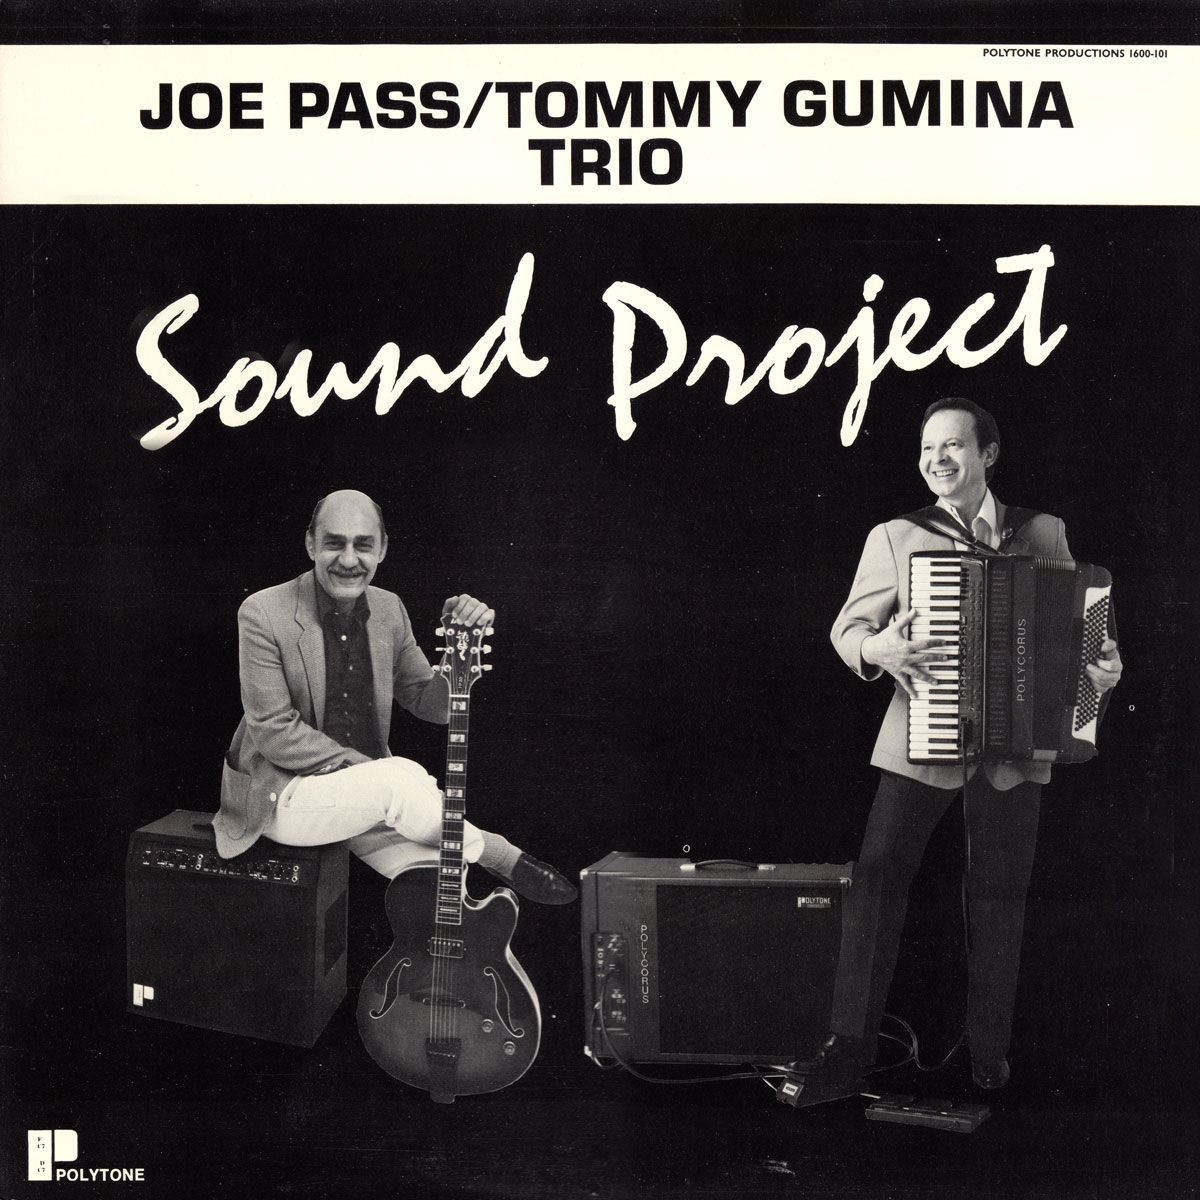 Joe Pass, Tommy Gumina Trio - Sound Project - Front cover